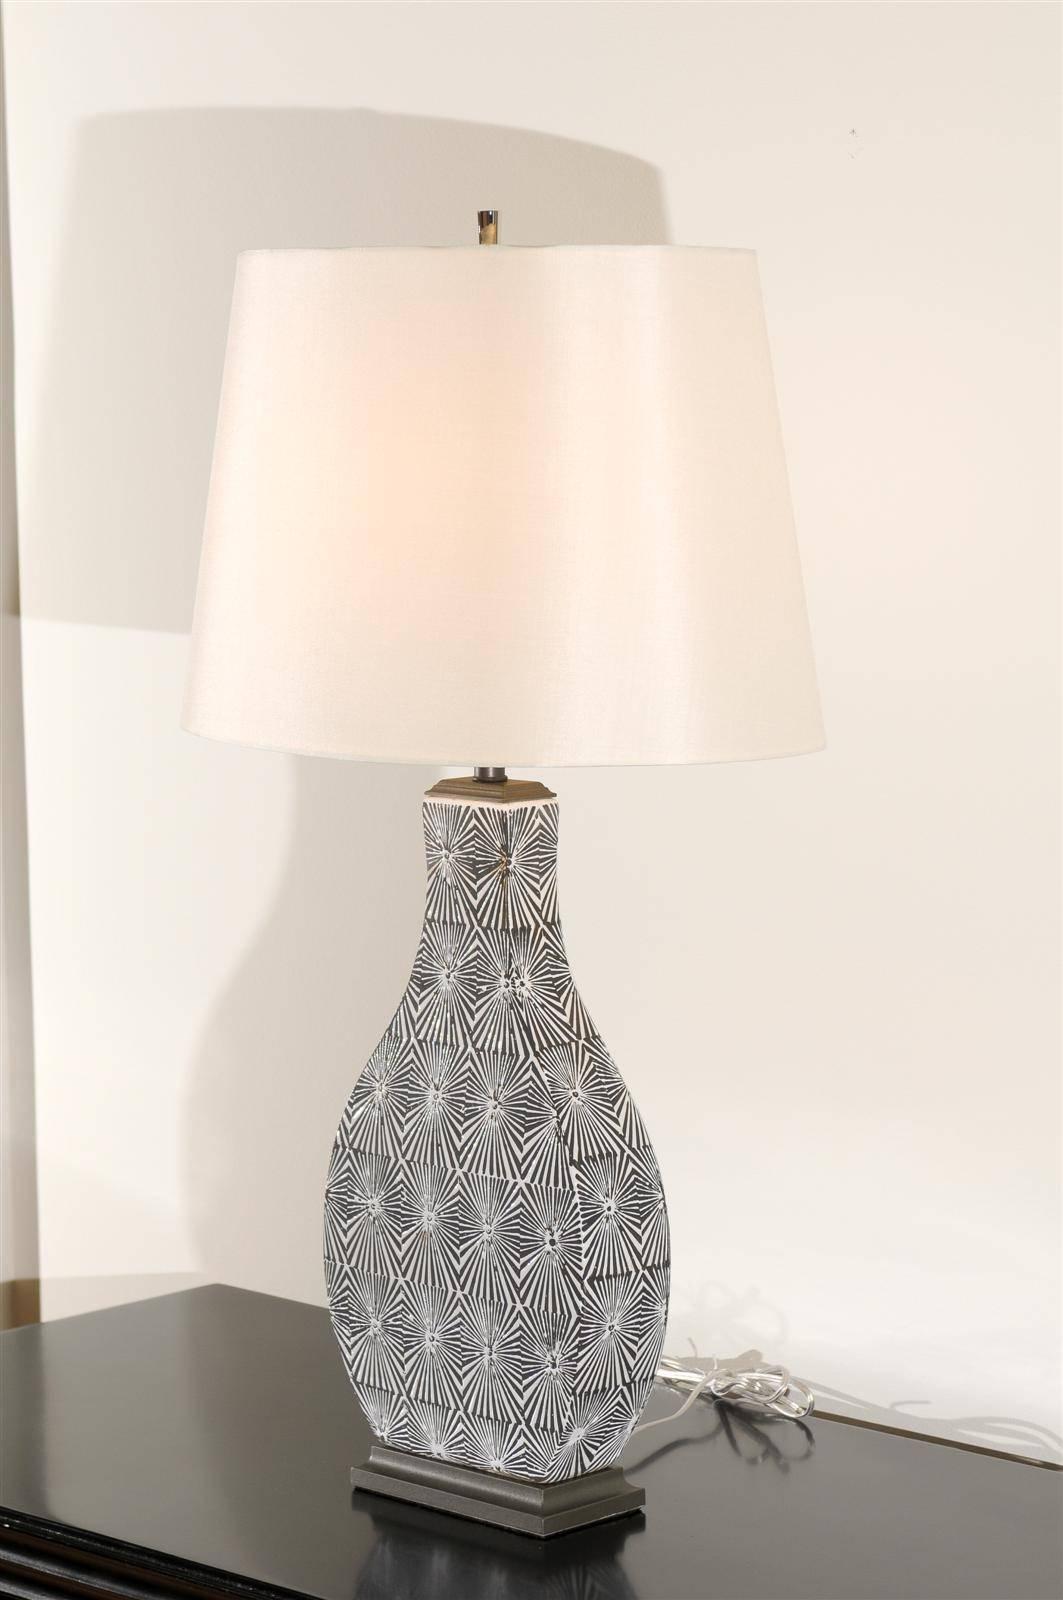 A wonderfully graphic pair of modern lamps, circa 1980s. Sexy ceramic form with glazed sunburst motifs in charcoal and cream. Fabulous design and detail. Dramatic jewelry! Excellent restored condition. Rewired using clear cord, new nickel three-way